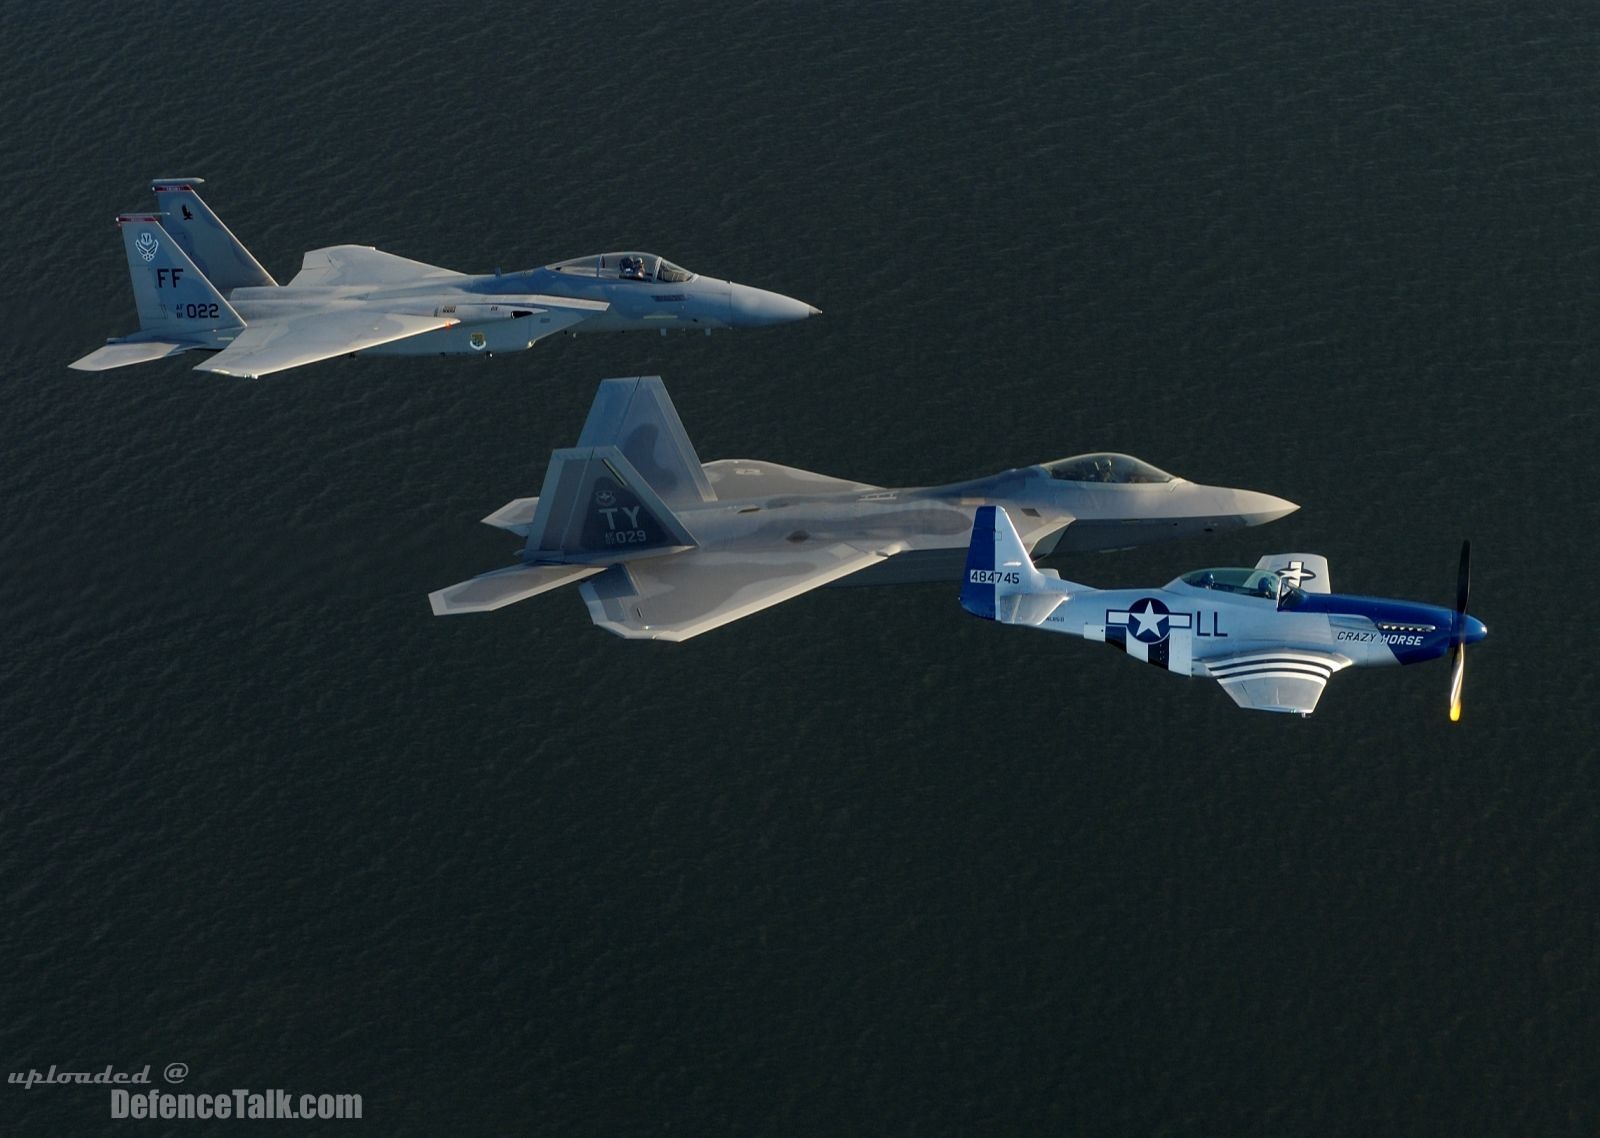 F-15 Eagle, F/A-22 Raptor and P-51 Mustang - US Air Force (USAF)